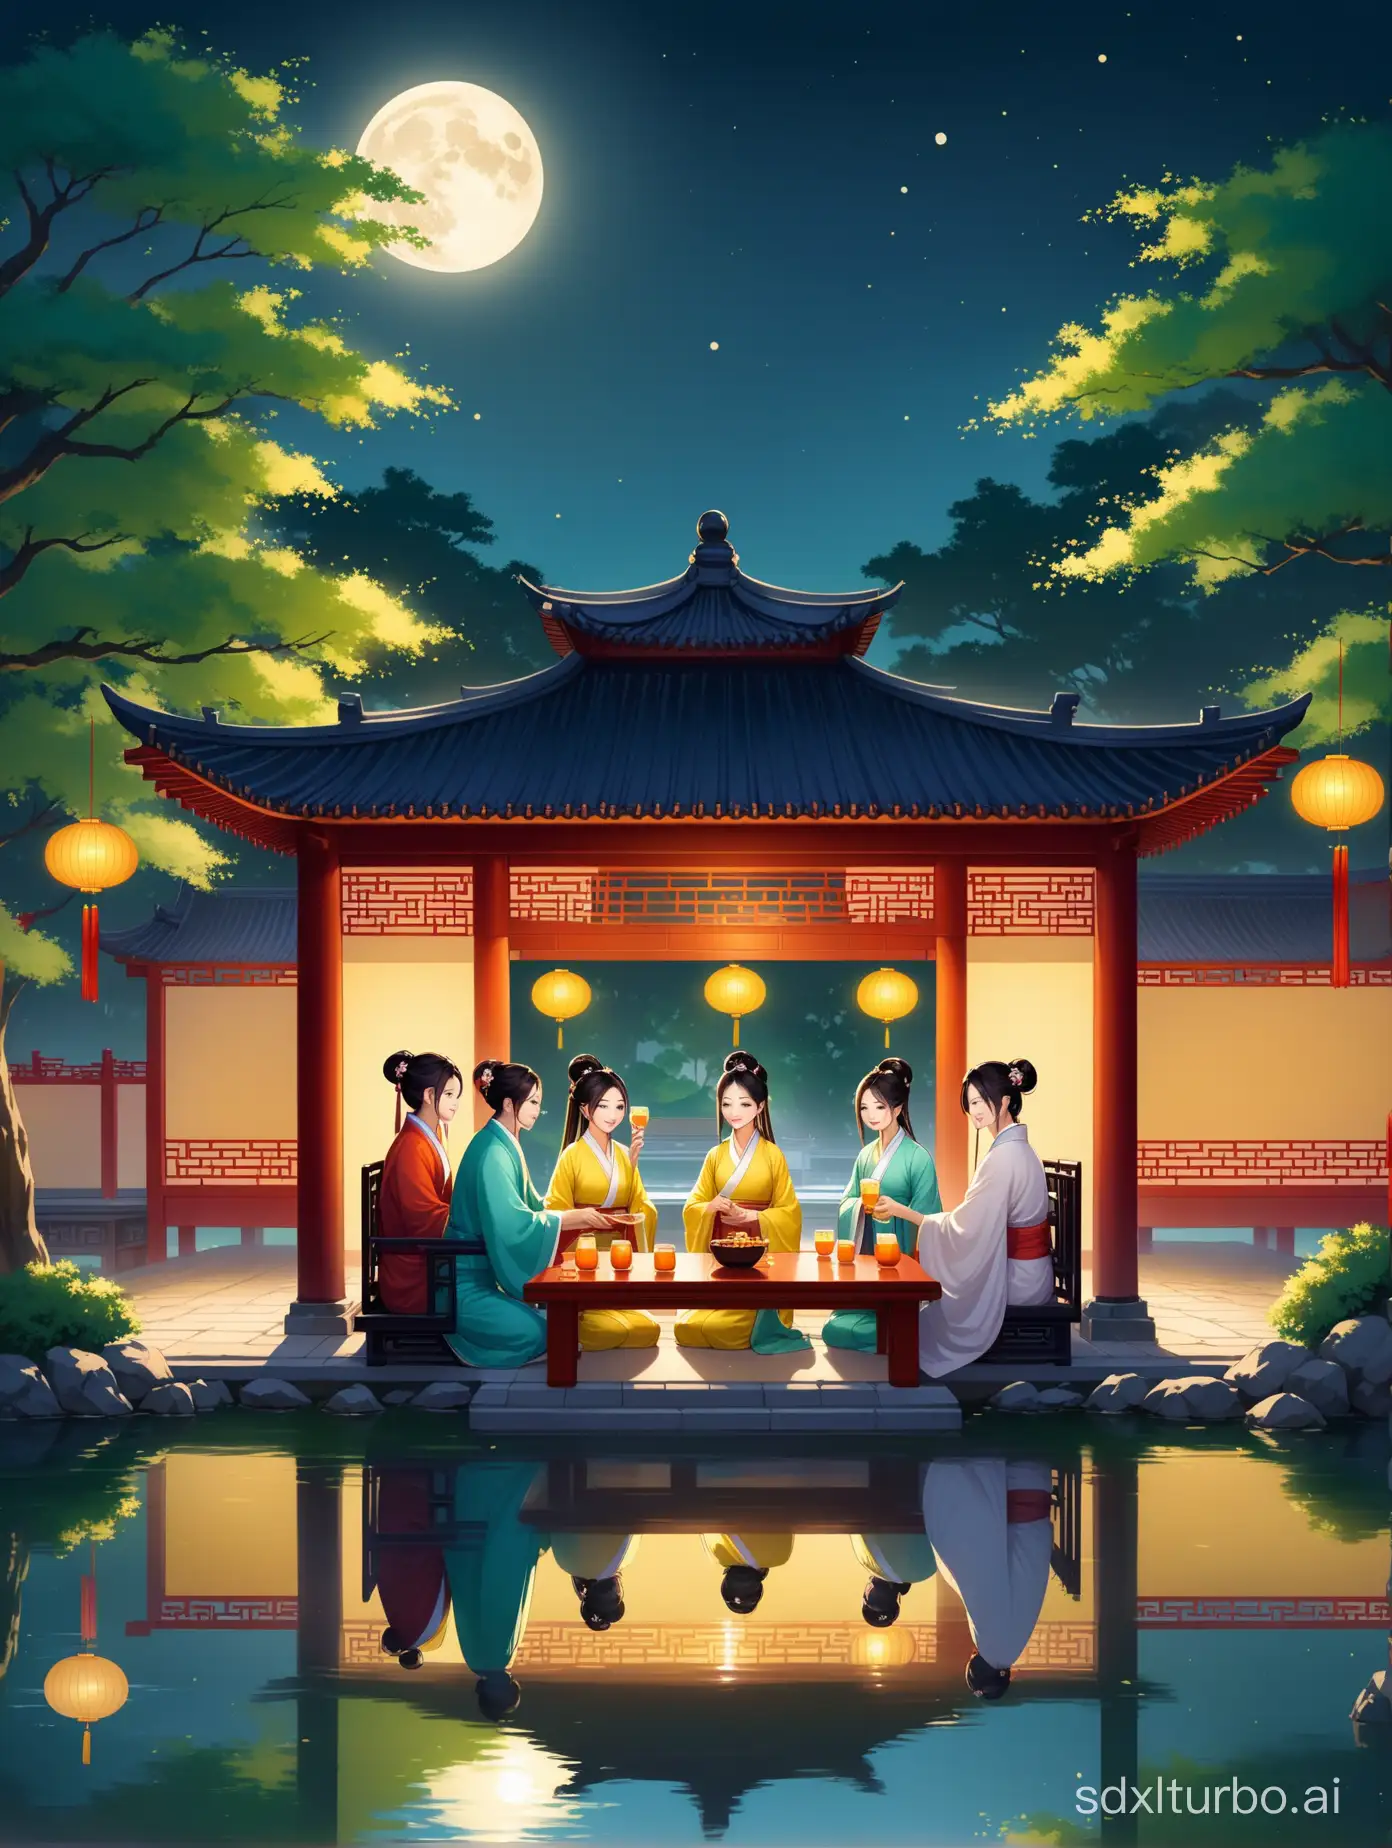 "A traditional Chinese Mid-Autumn Festival celebration under the full moon, featuring ancient Chinese scholars in Hanfu (traditional Han Chinese clothing) gathered around a table, enjoying a drink and laughing merrily. The setting is a classical Chinese garden with a pavilion, stone paths, lush greenery, and a serene pond reflecting the moonlight. The atmosphere is joyous and festive, imbued with a sense of timeless elegance and cultural richness."